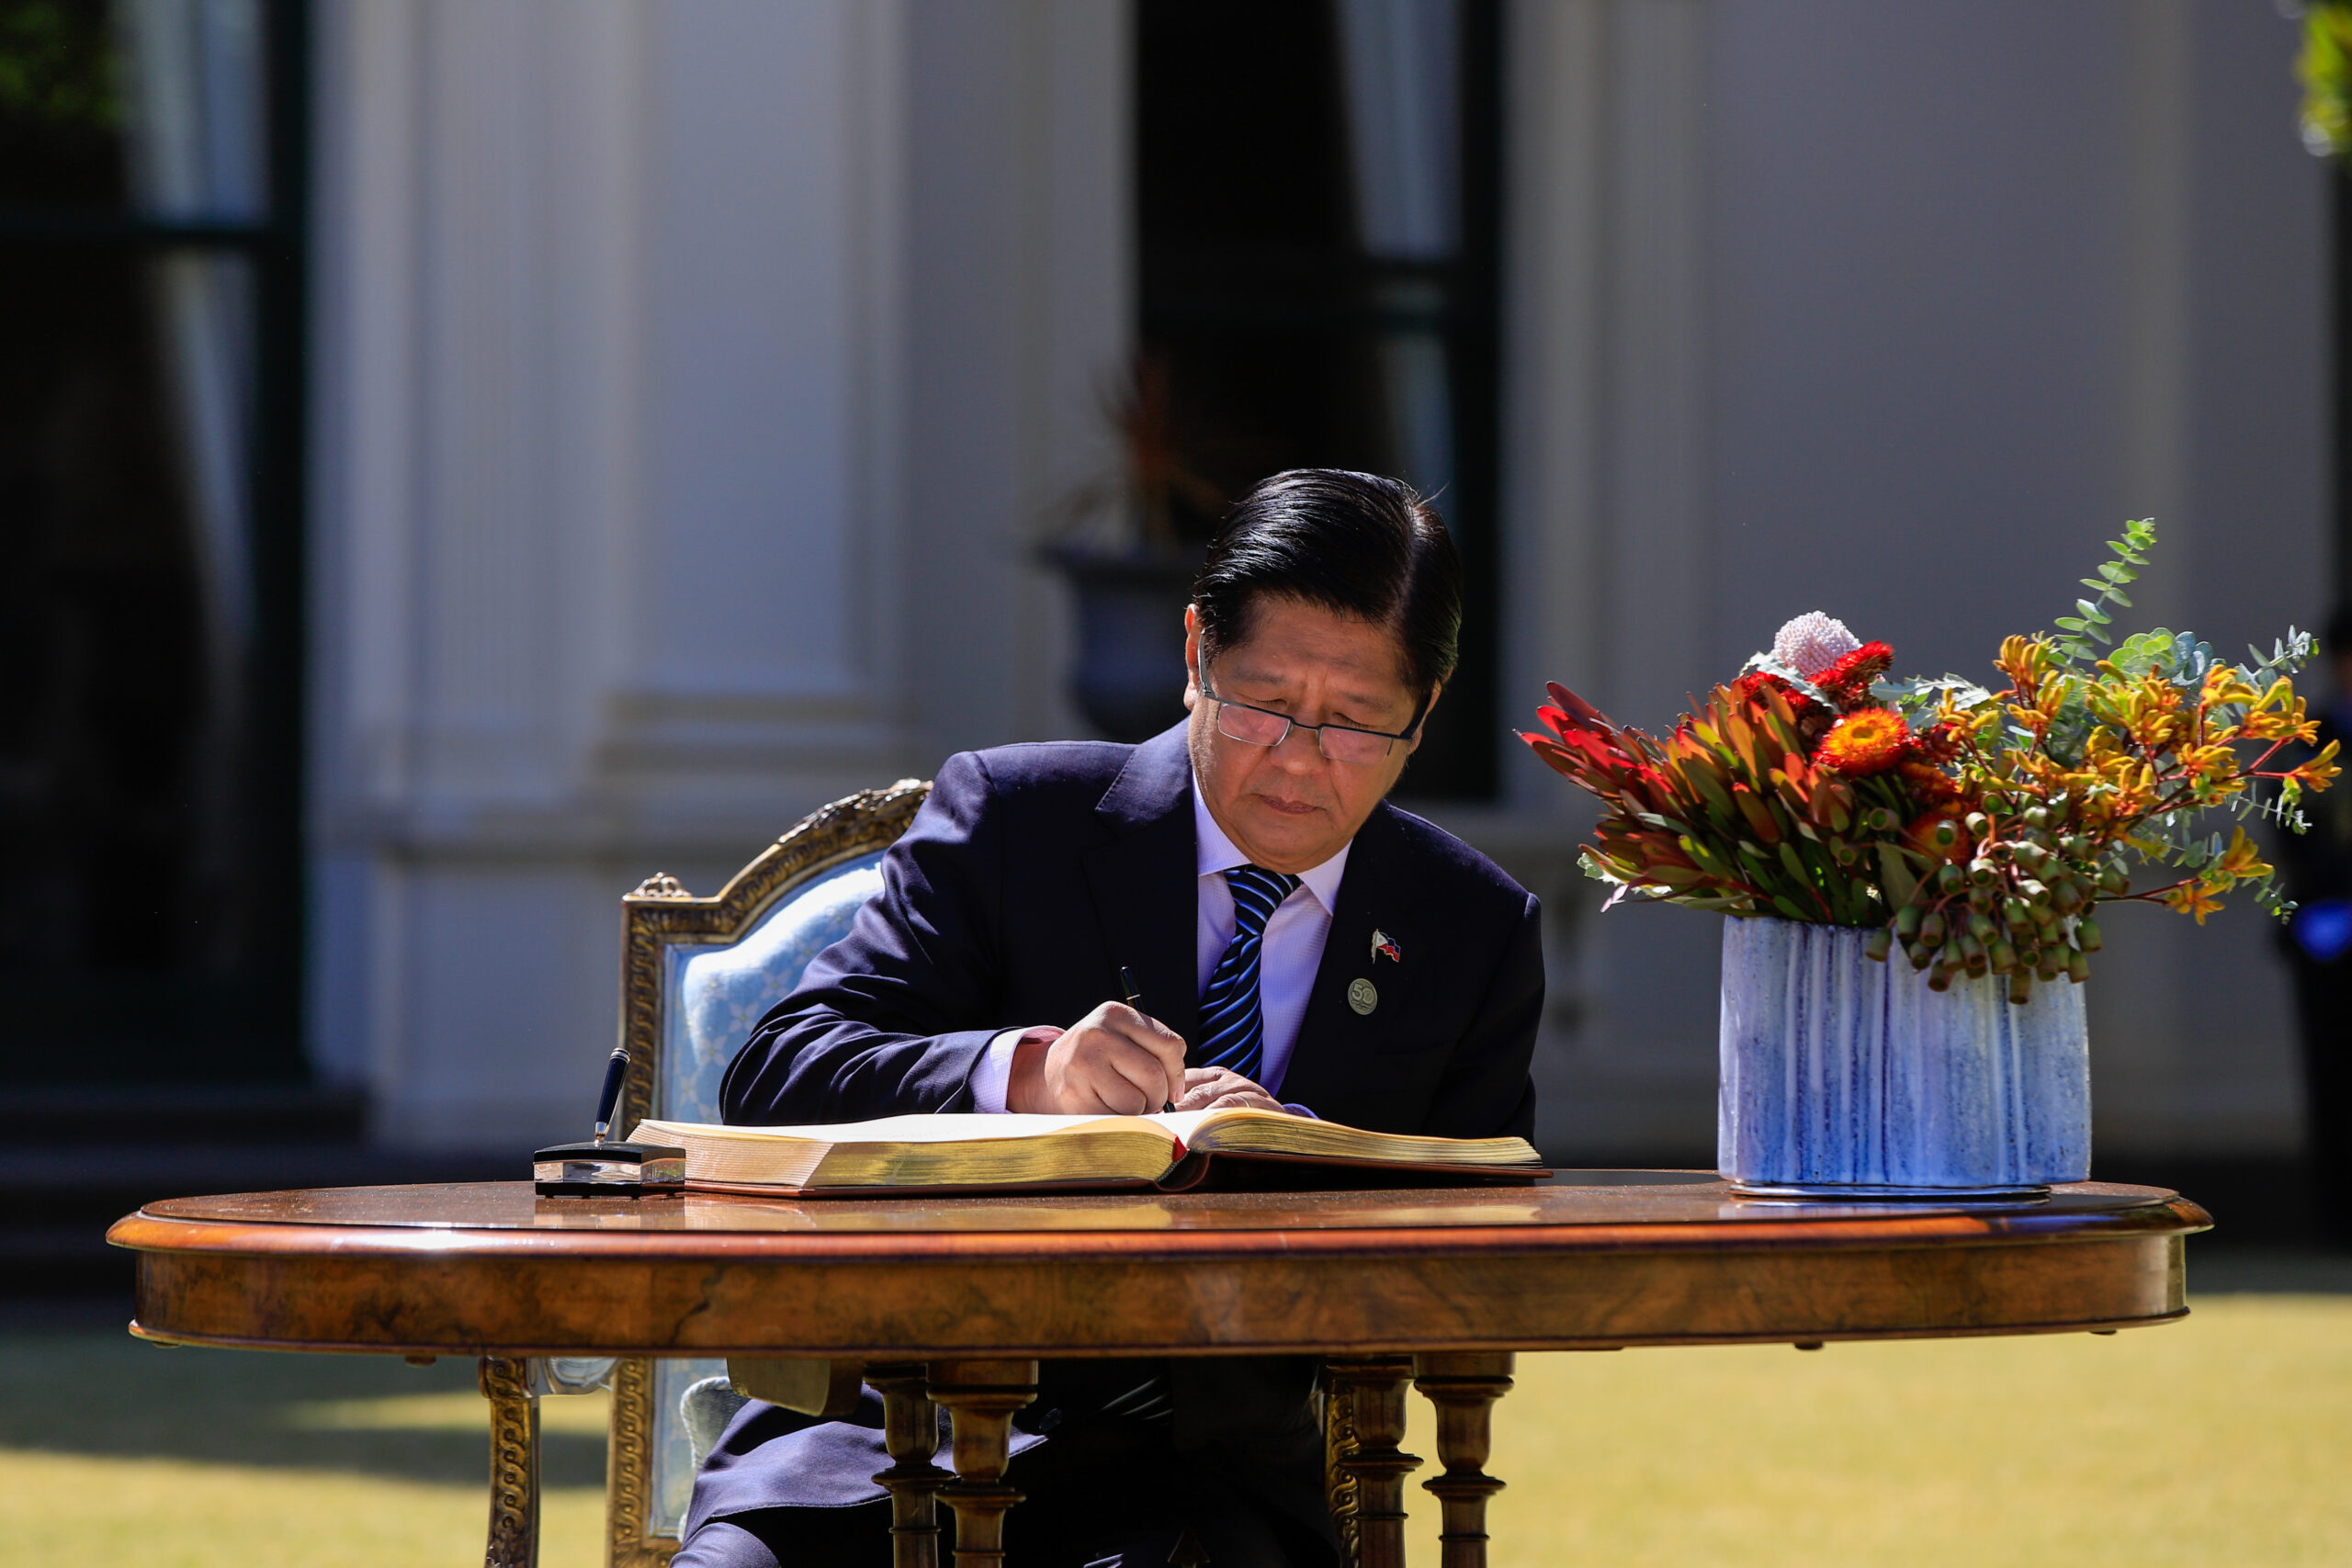 President Marcos, pictured signing a guestbook in Melbourne